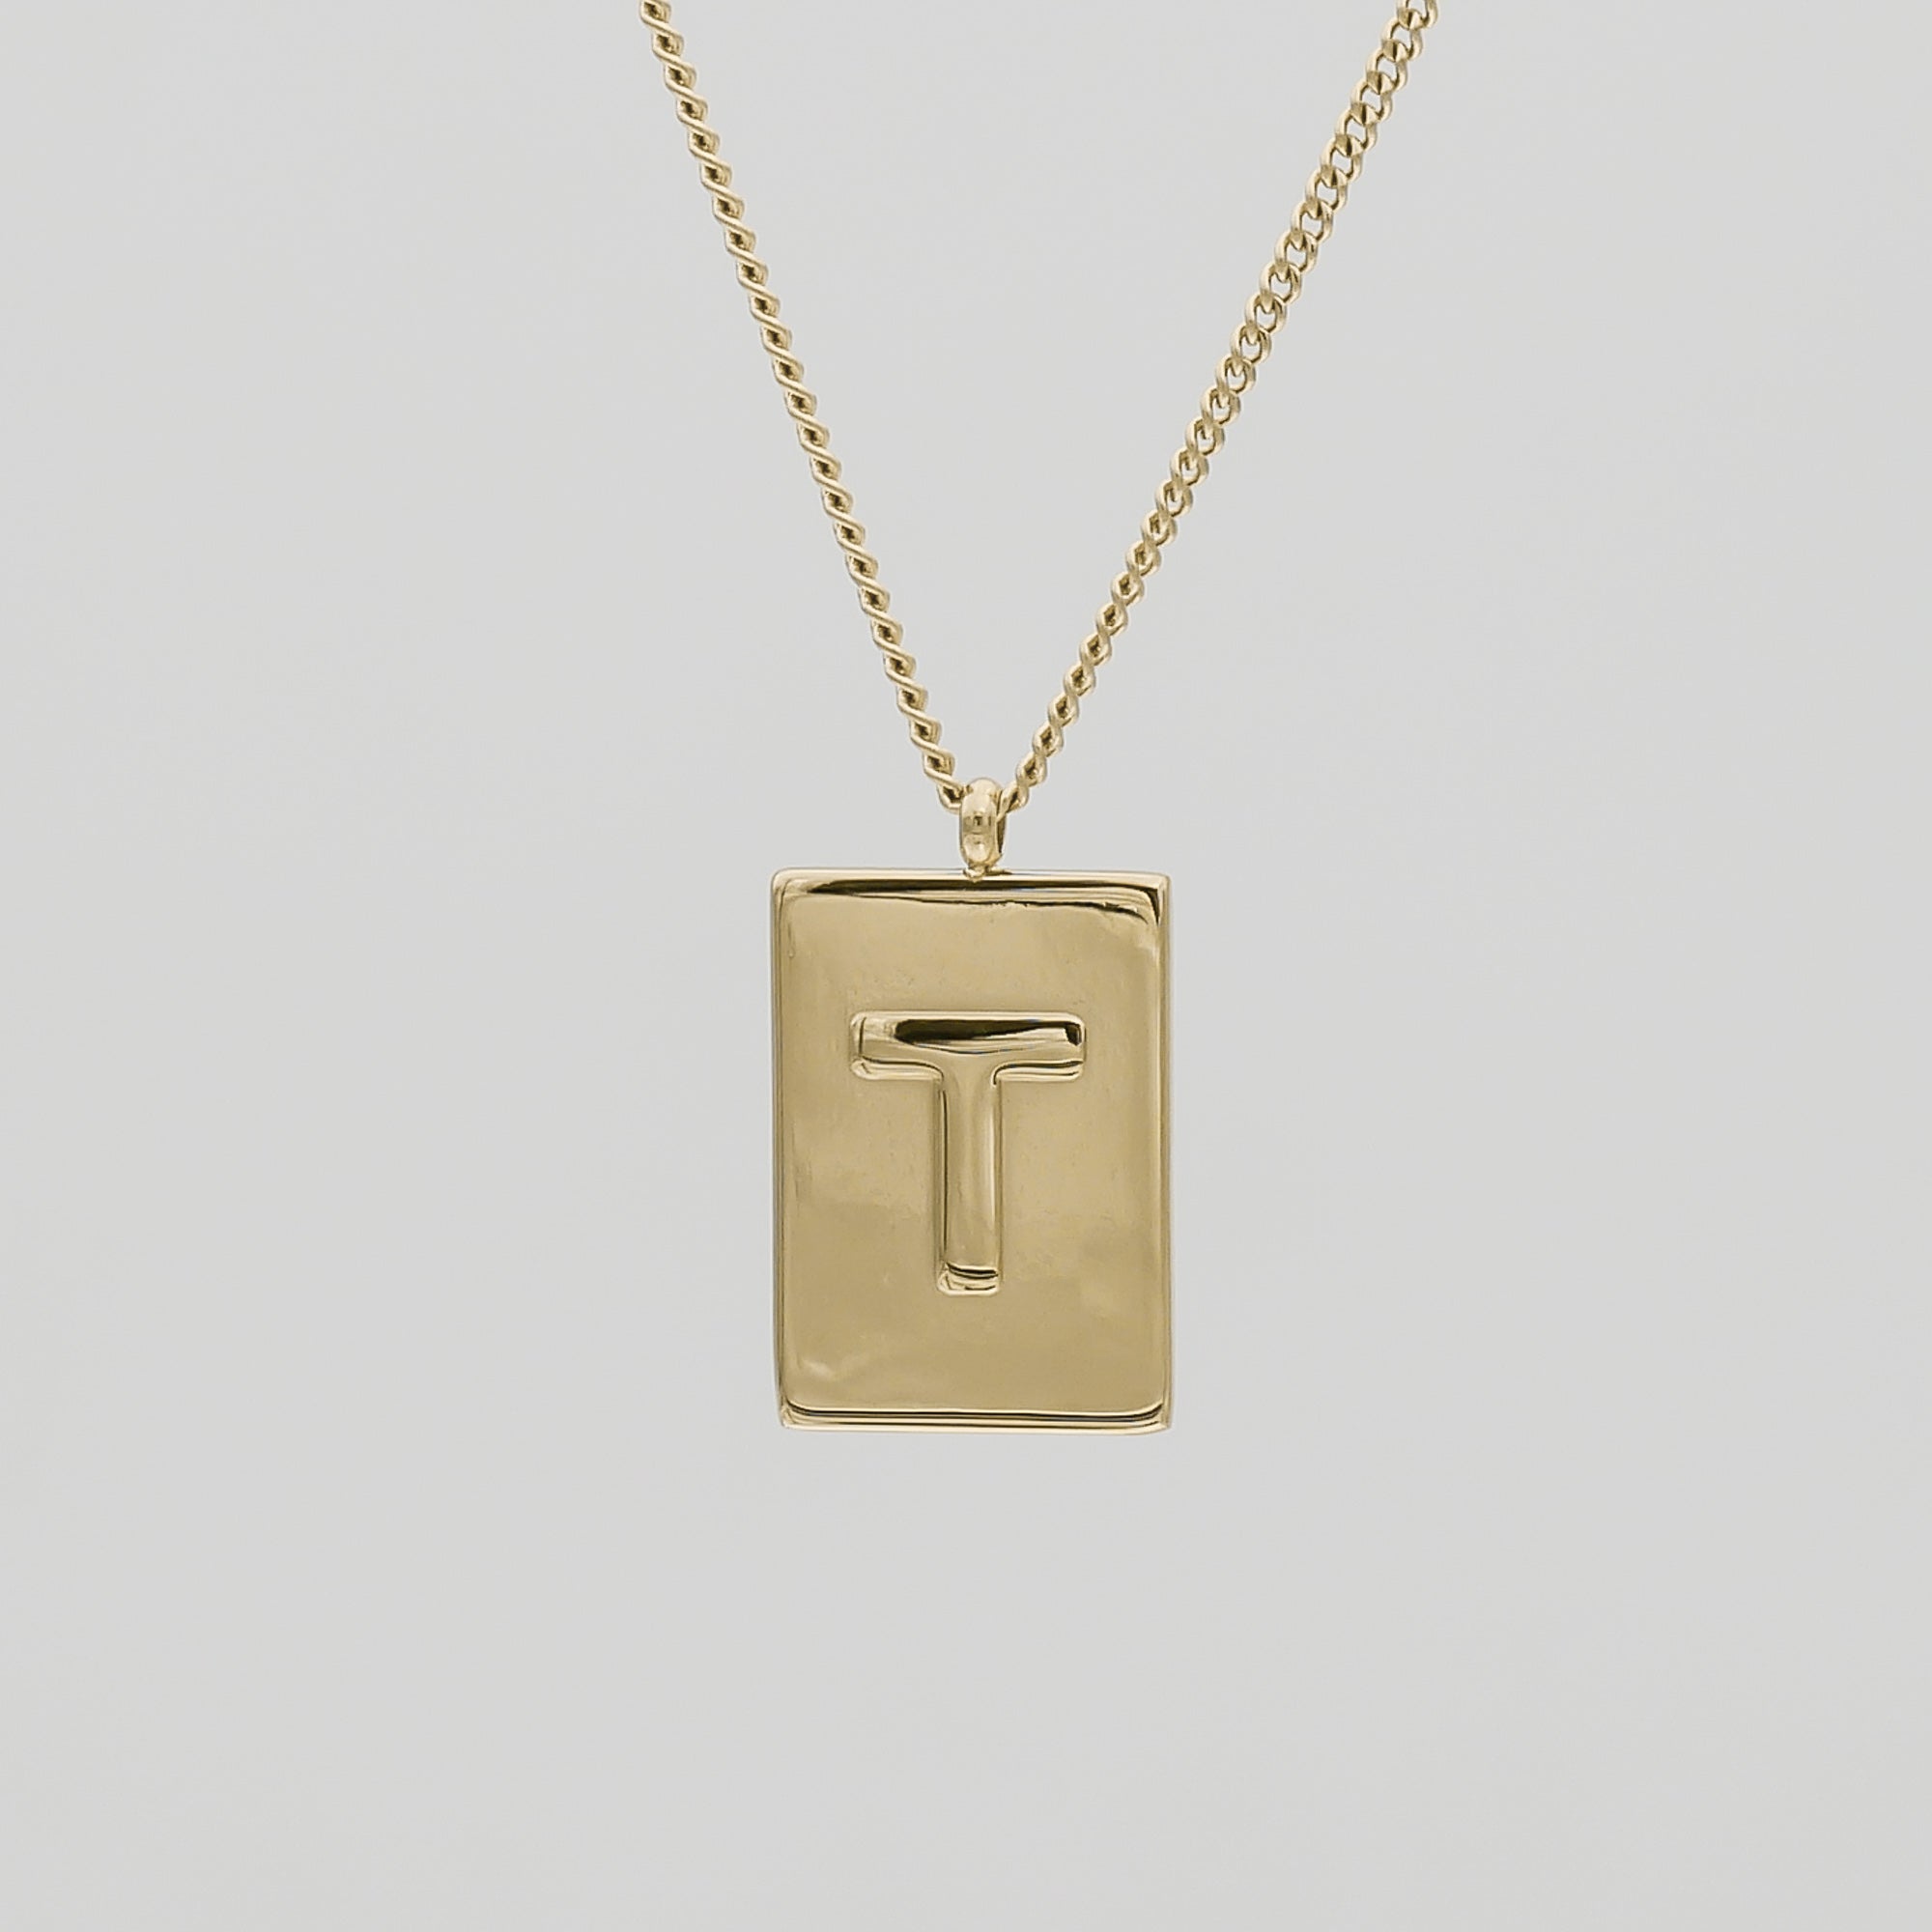 Athena custom initial Gold pendant Necklace, letter T by PRYA